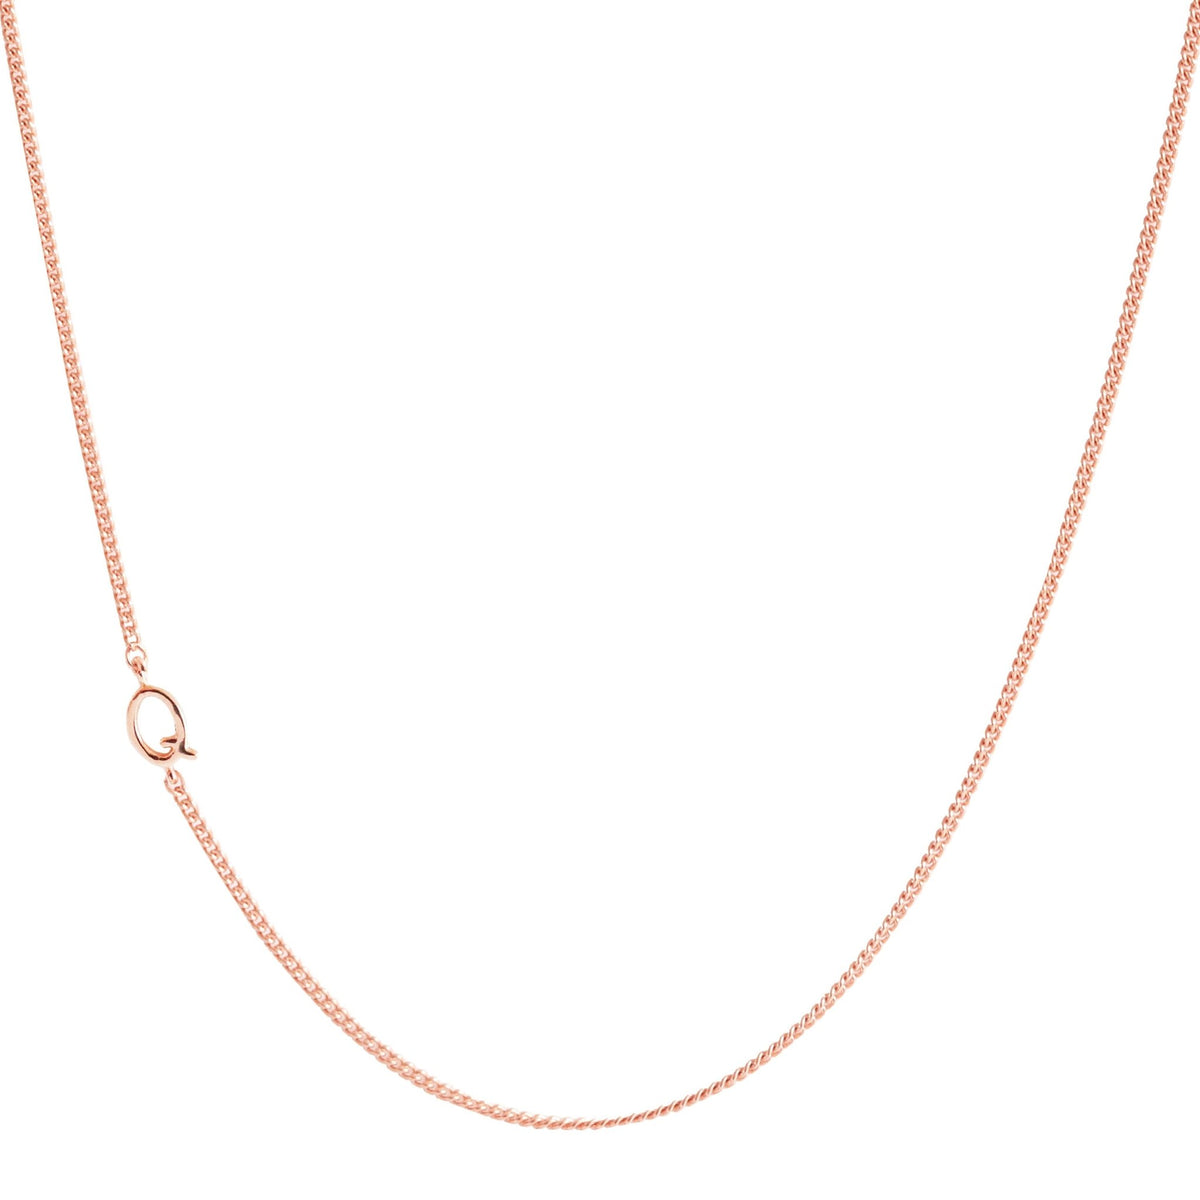 NOTABLE OFFSET INITIAL NECKLACE - Q - GOLD, ROSE GOLD, OR SILVER - SO PRETTY CARA COTTER